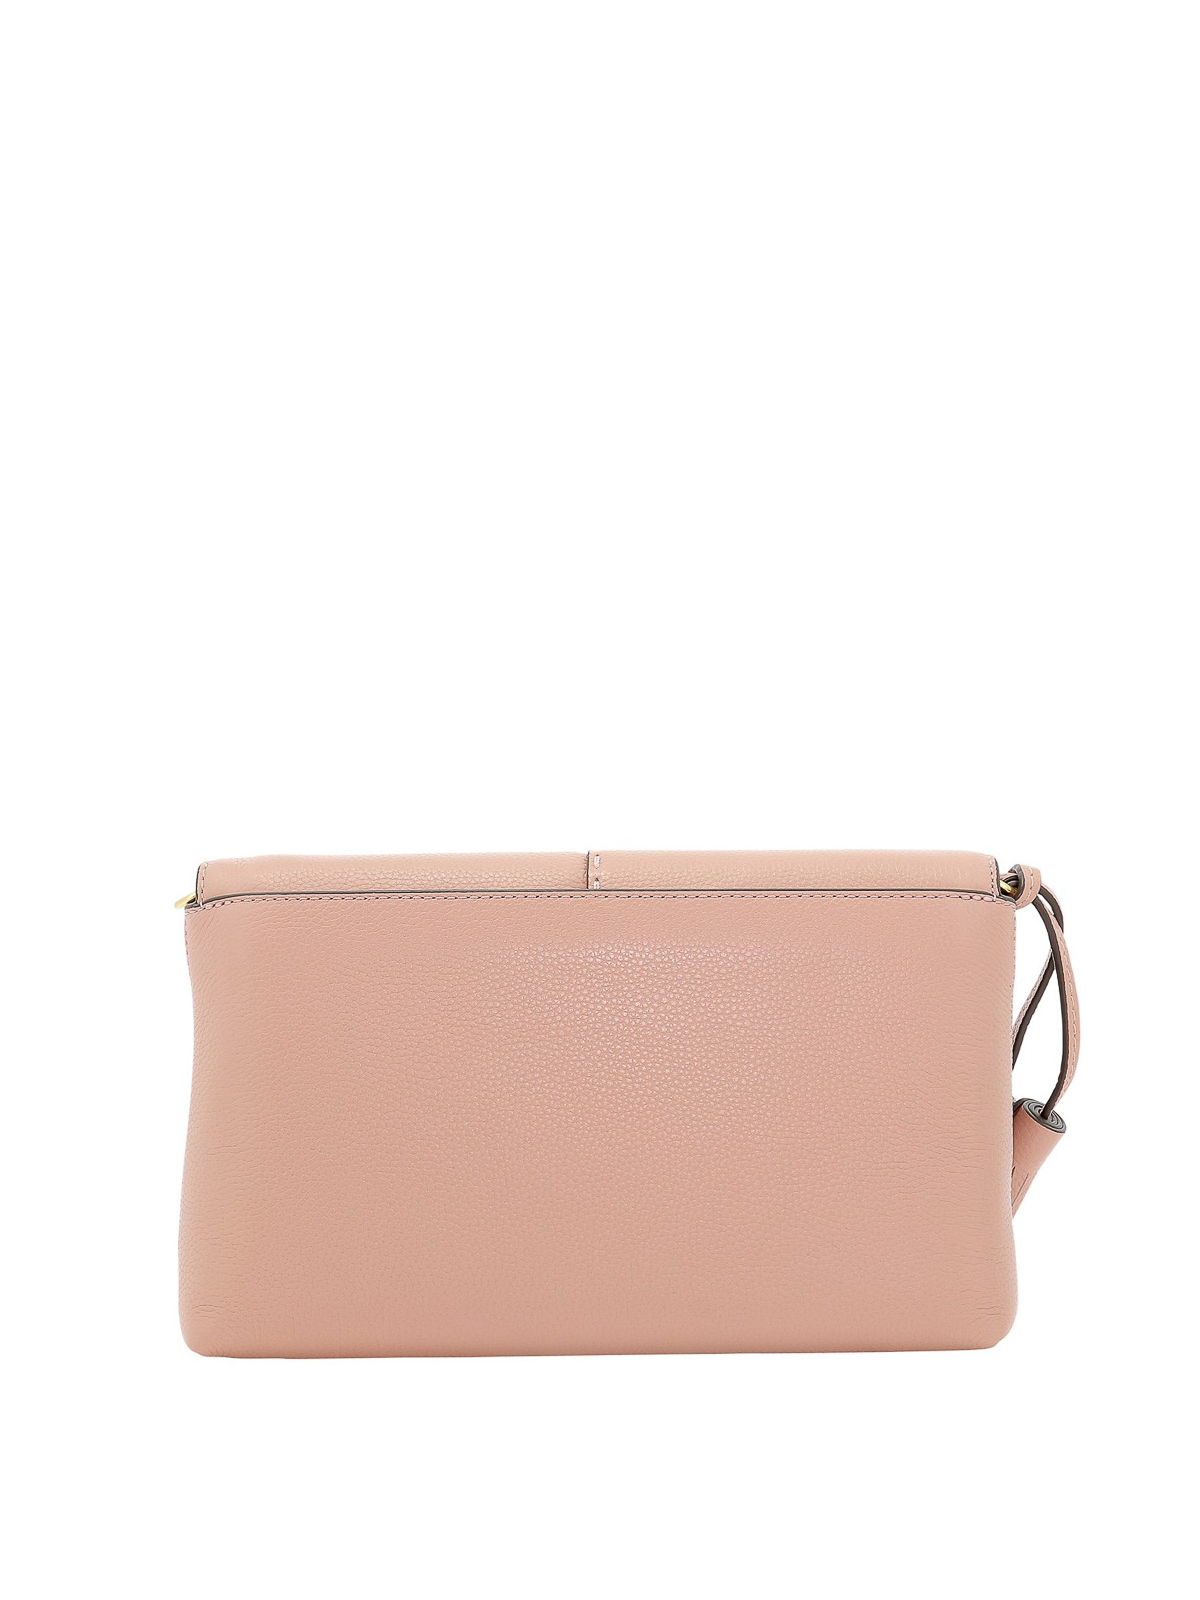 Clutches Tory Burch - McGraw clutch - 64456689 | Shop online at iKRIX